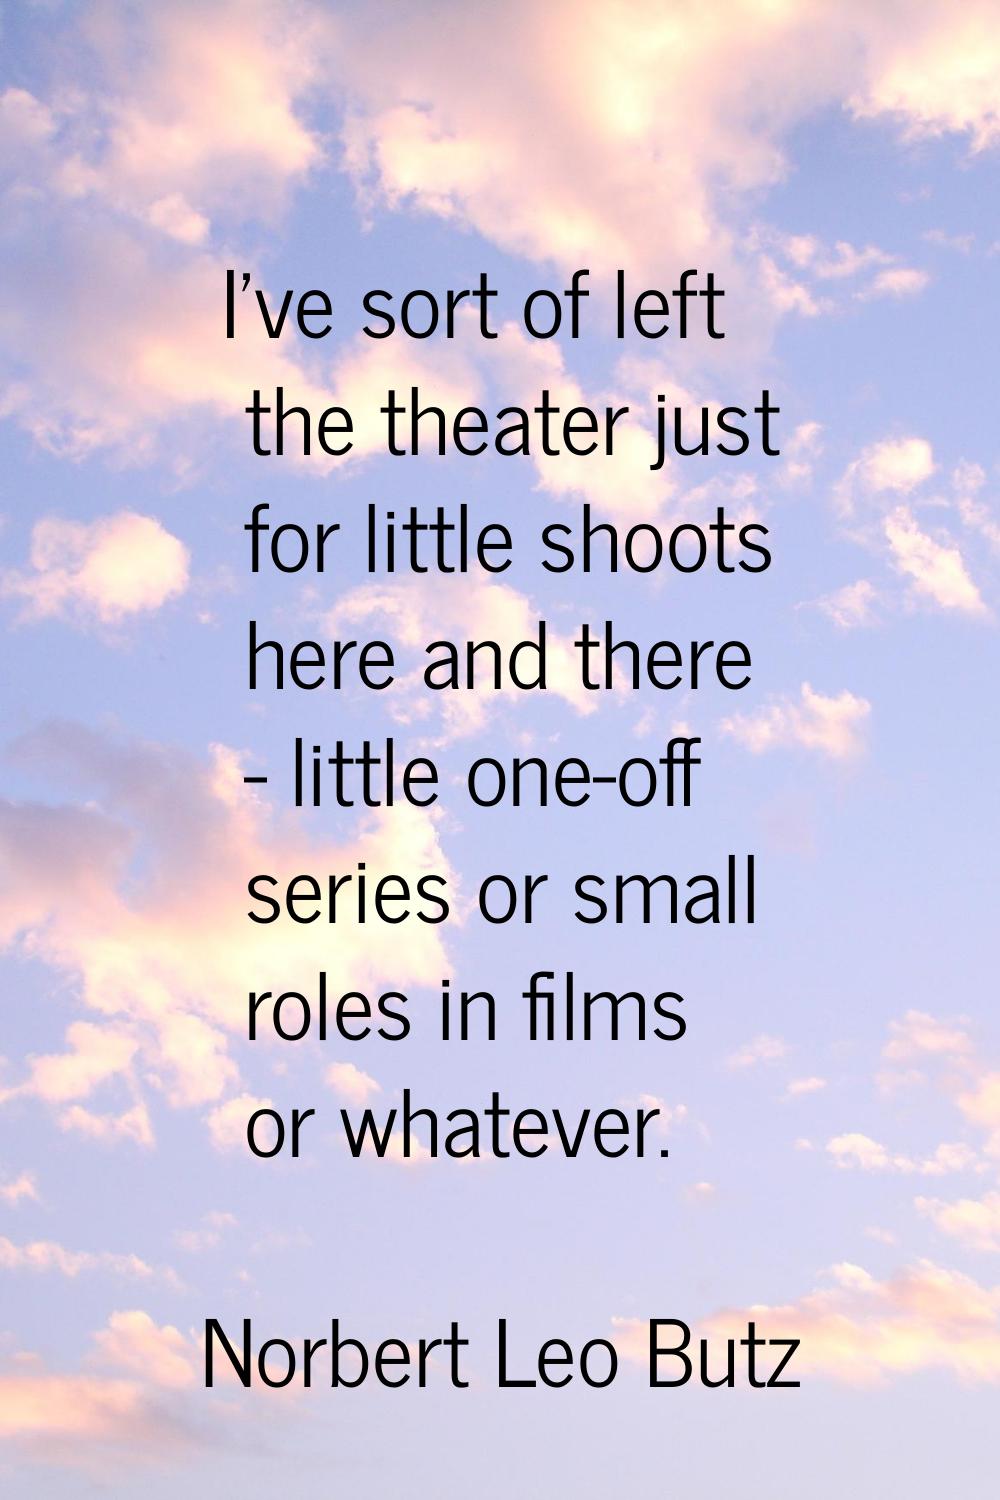 I've sort of left the theater just for little shoots here and there - little one-off series or smal